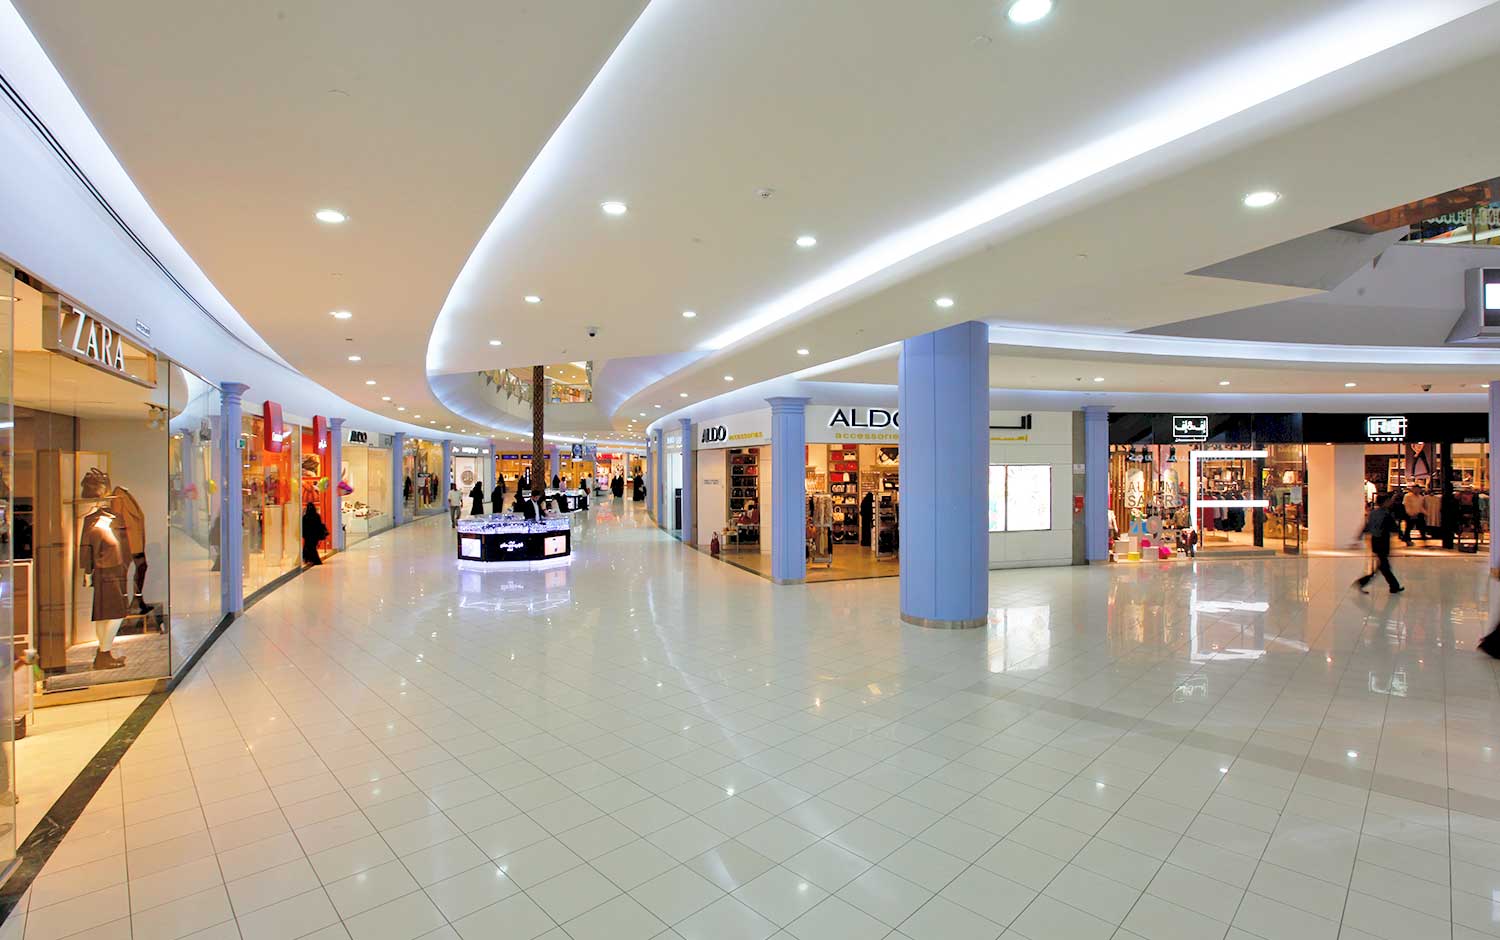 Hurry up to book a shop with an area starting from 45 meters in za mall